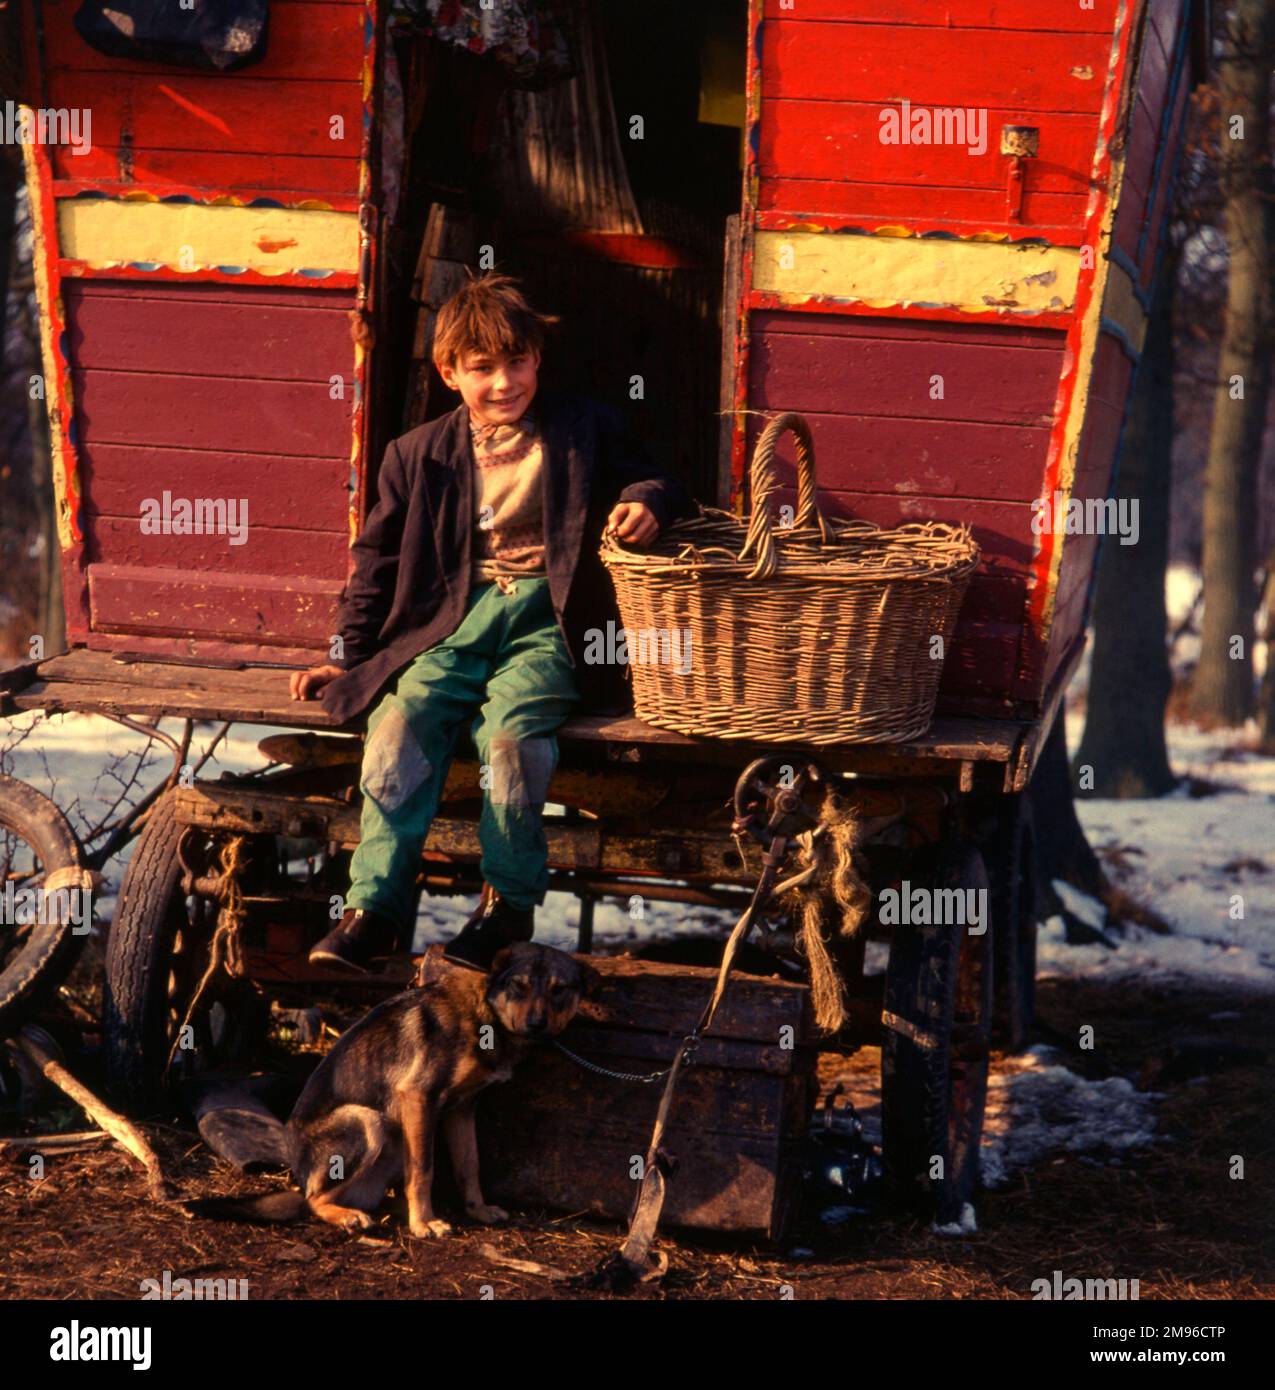 A smiling gipsy boy sitting on the back step of his red and yellow caravan, with a large basket at his side, and a pet dog at his feet. Stock Photo